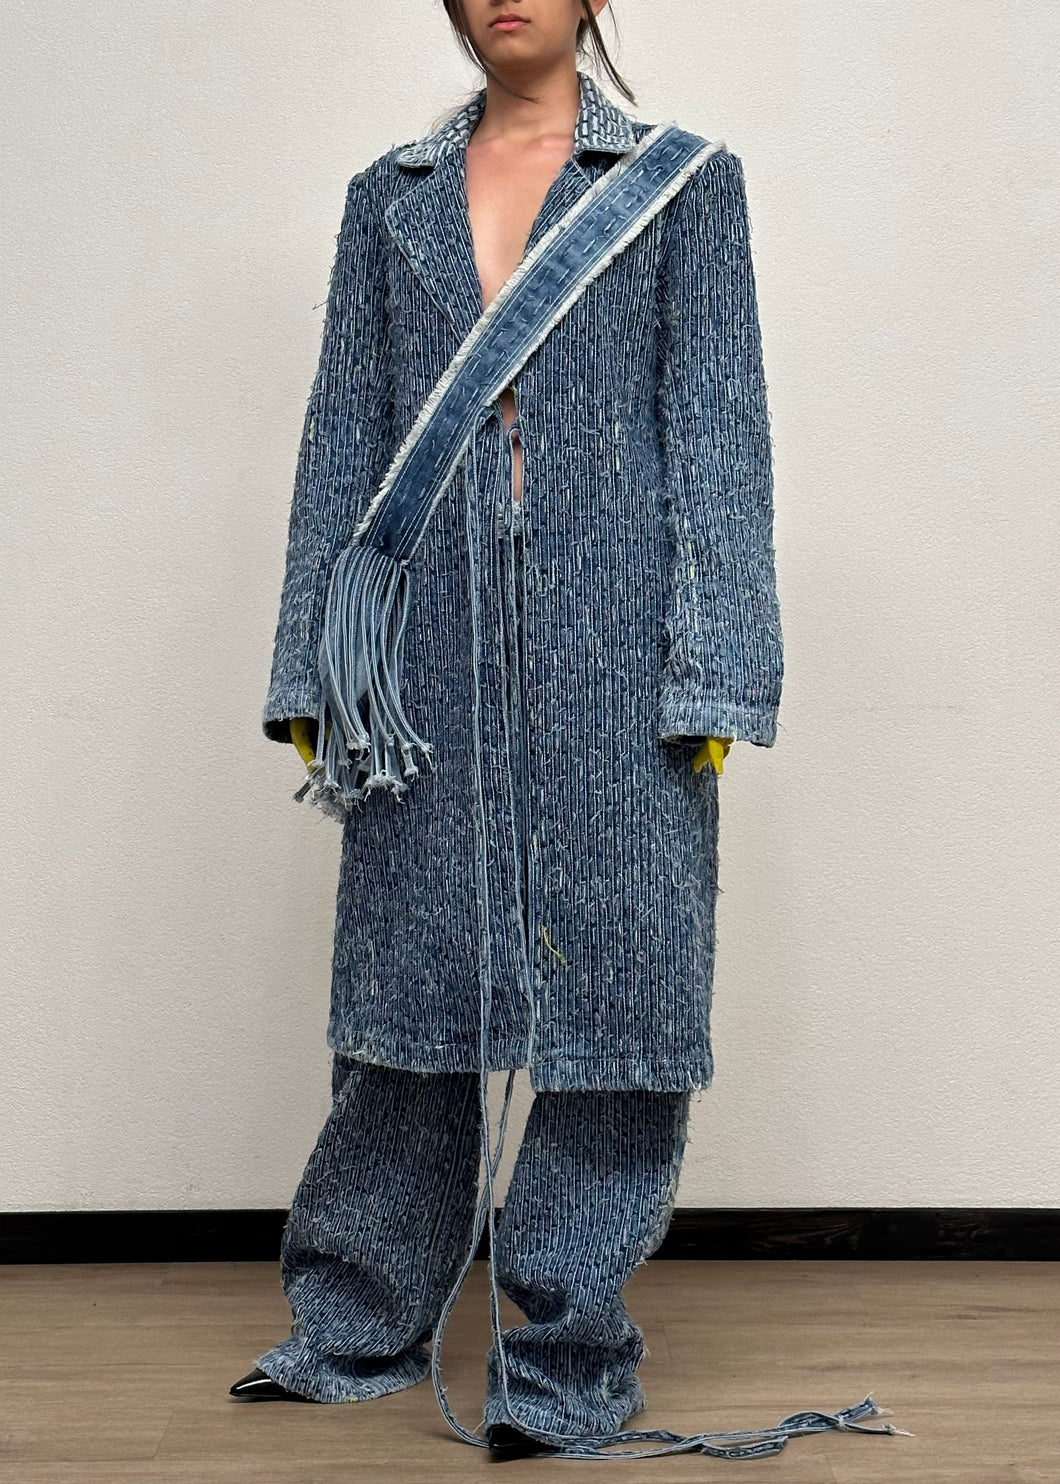 RIPPER TRENCH COAT IN BLUE